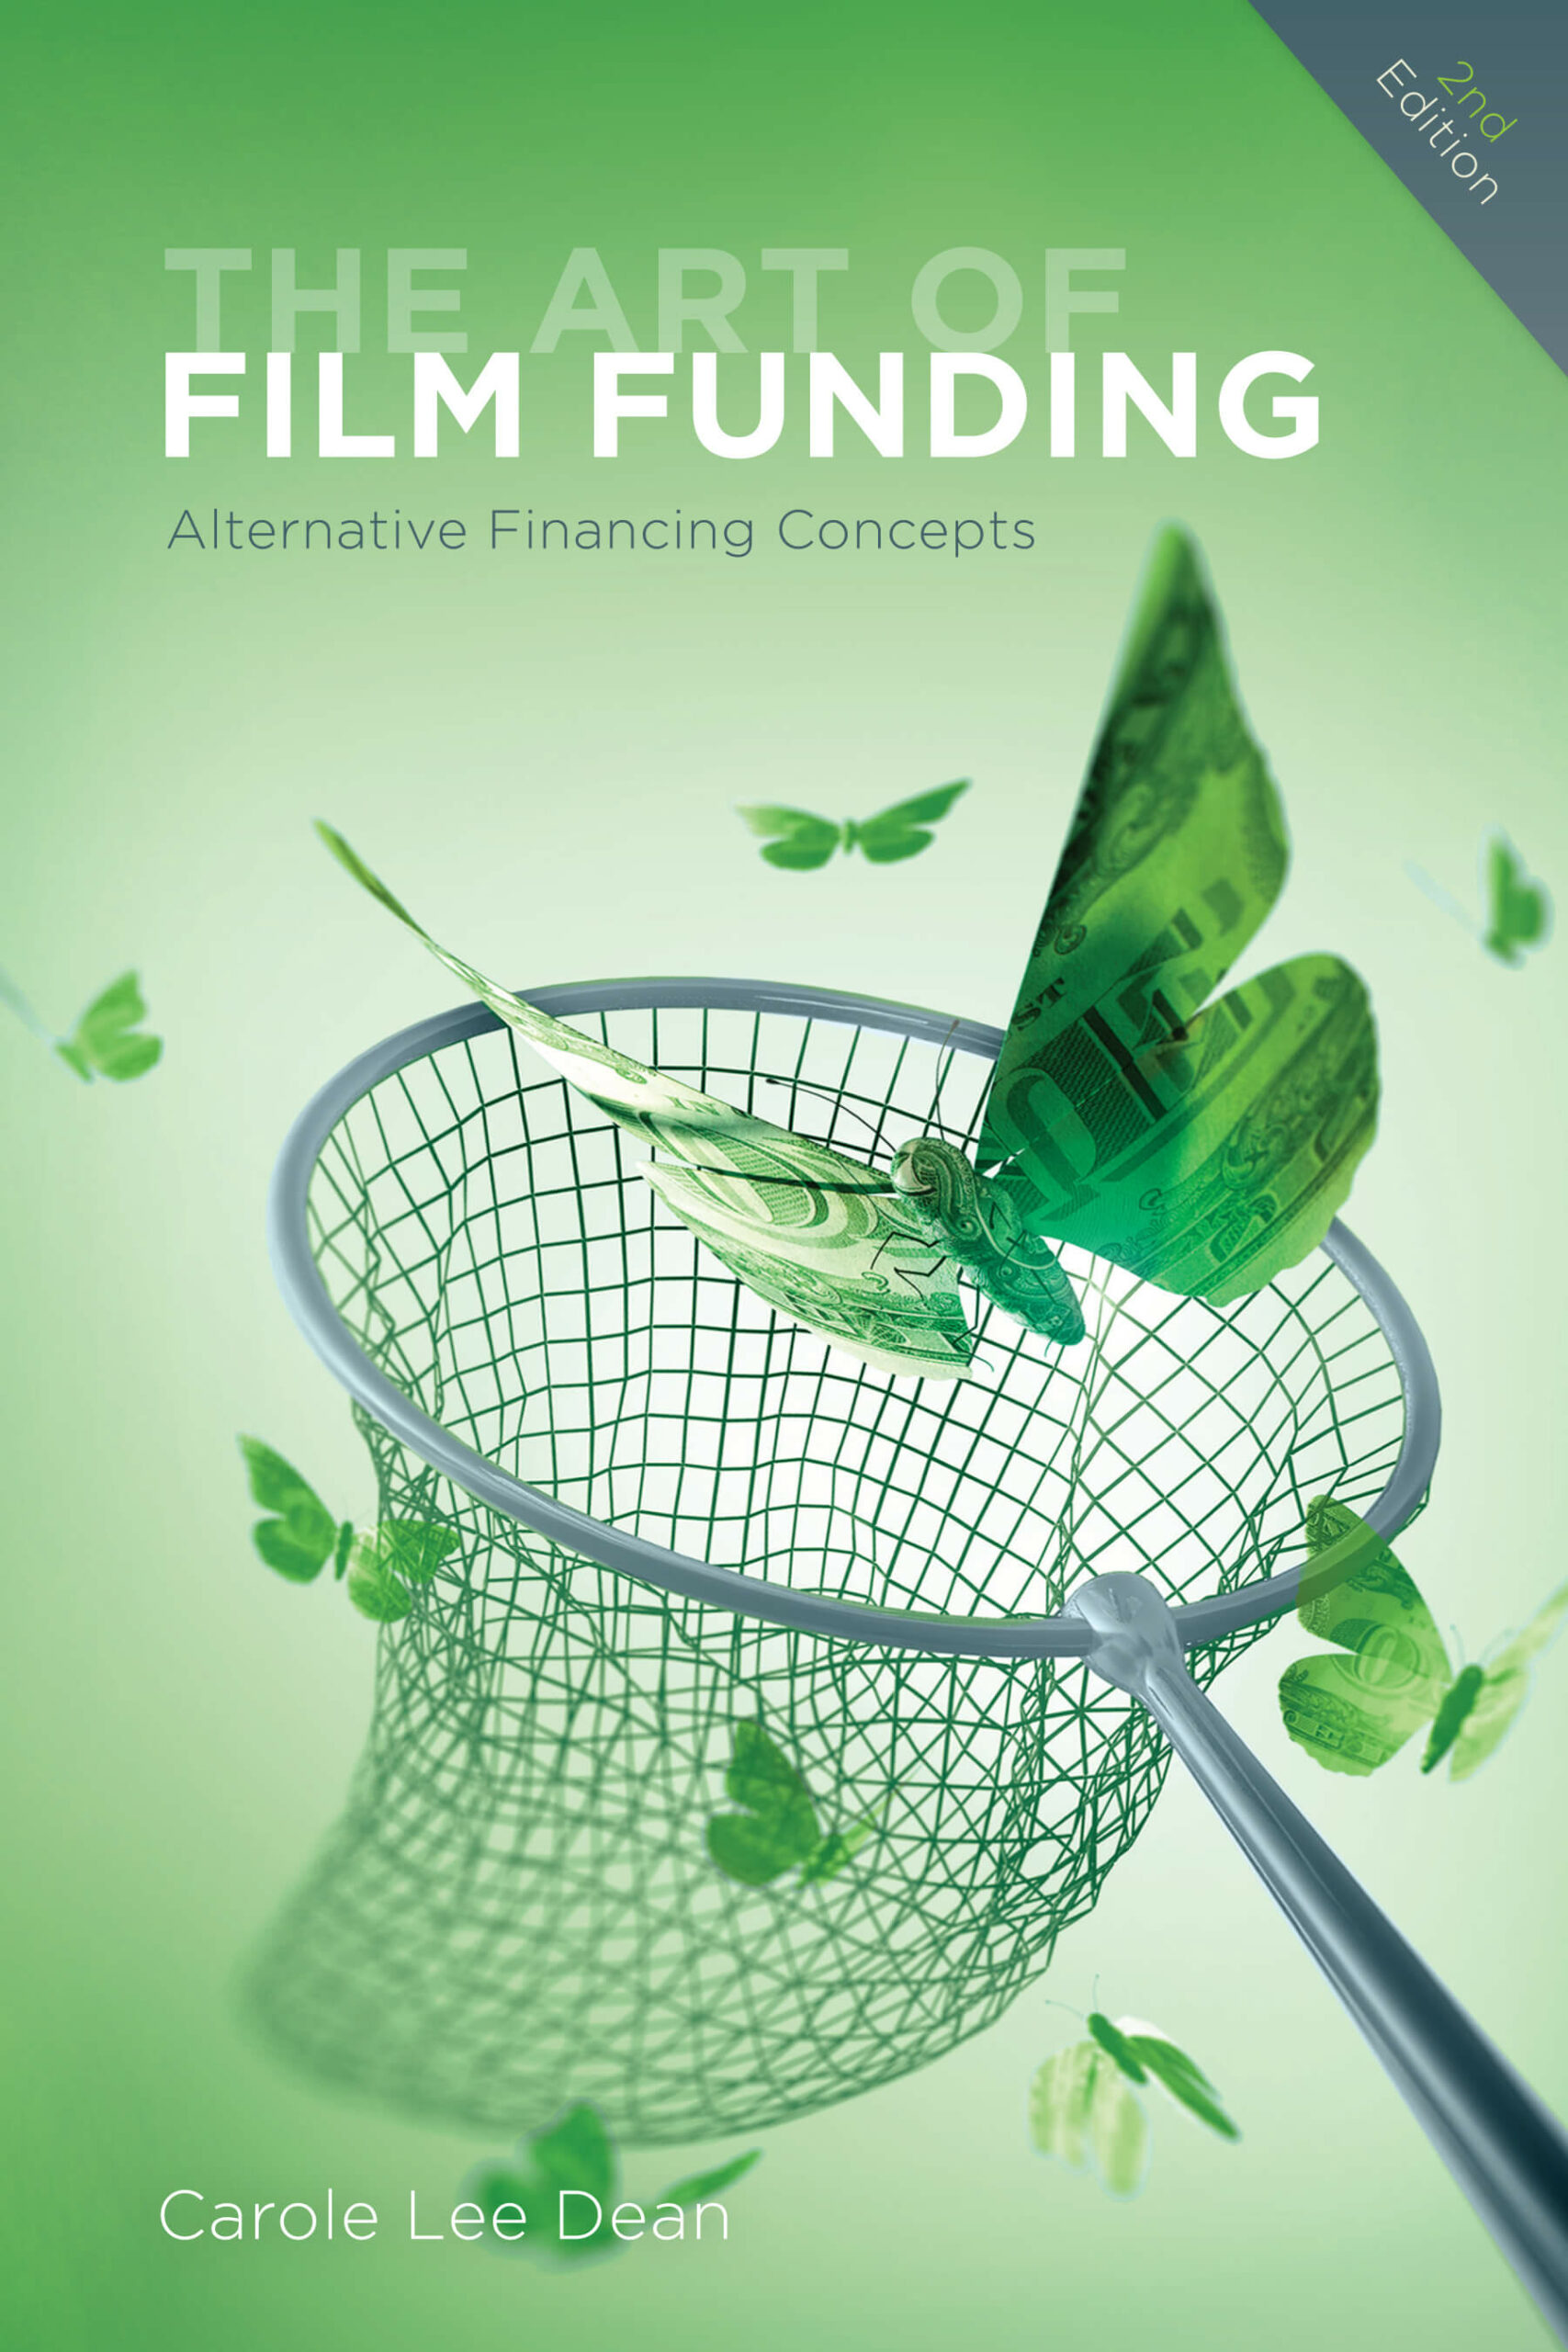 The Art of Film Funding: Alternative Financing Concepts (2nd Edition)